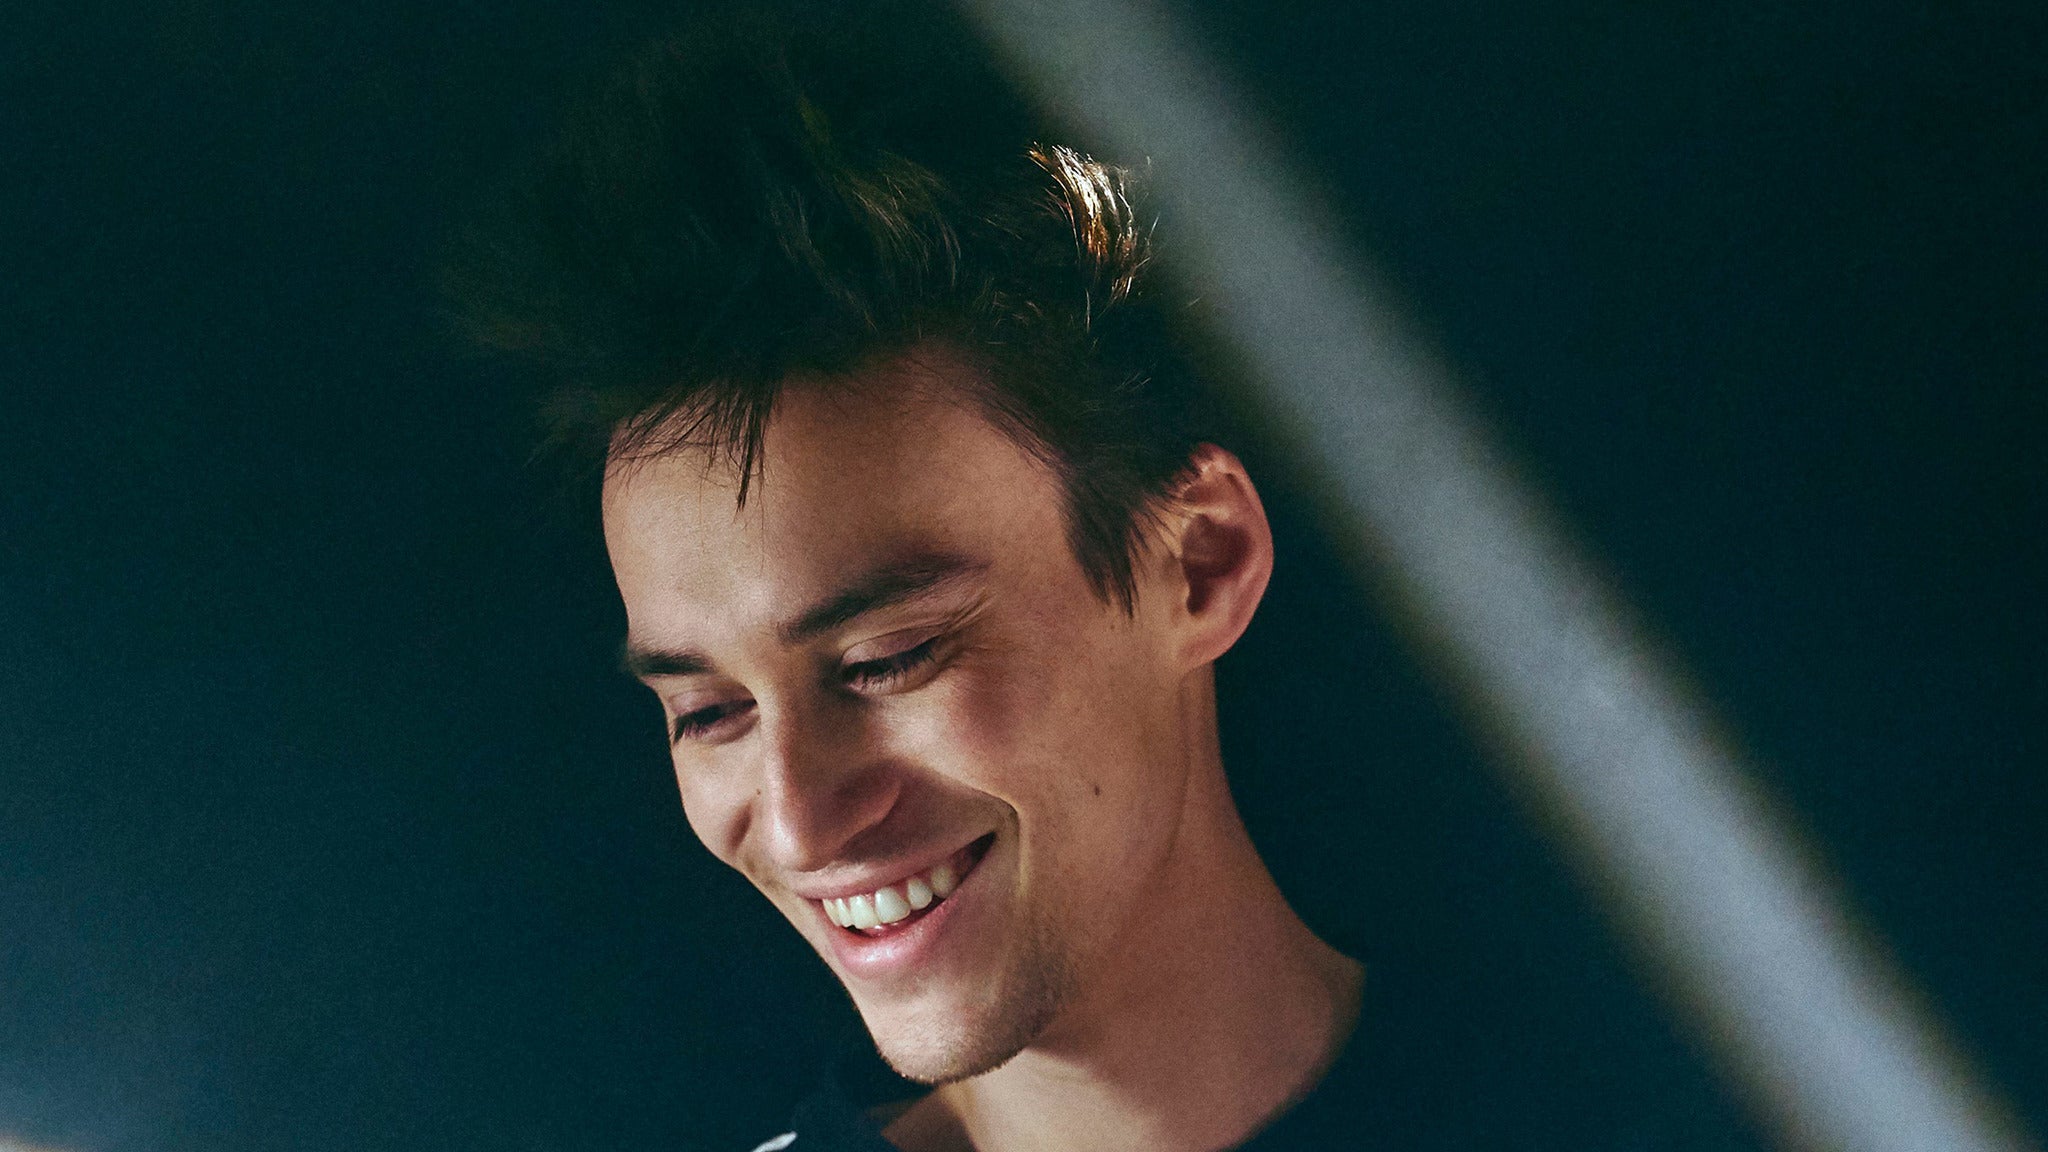 Jacob Collier - DJESSE WORLD TOUR SPRING 2022 - MOVED TO HISTORY in Toronto promo photo for Facebook presale offer code